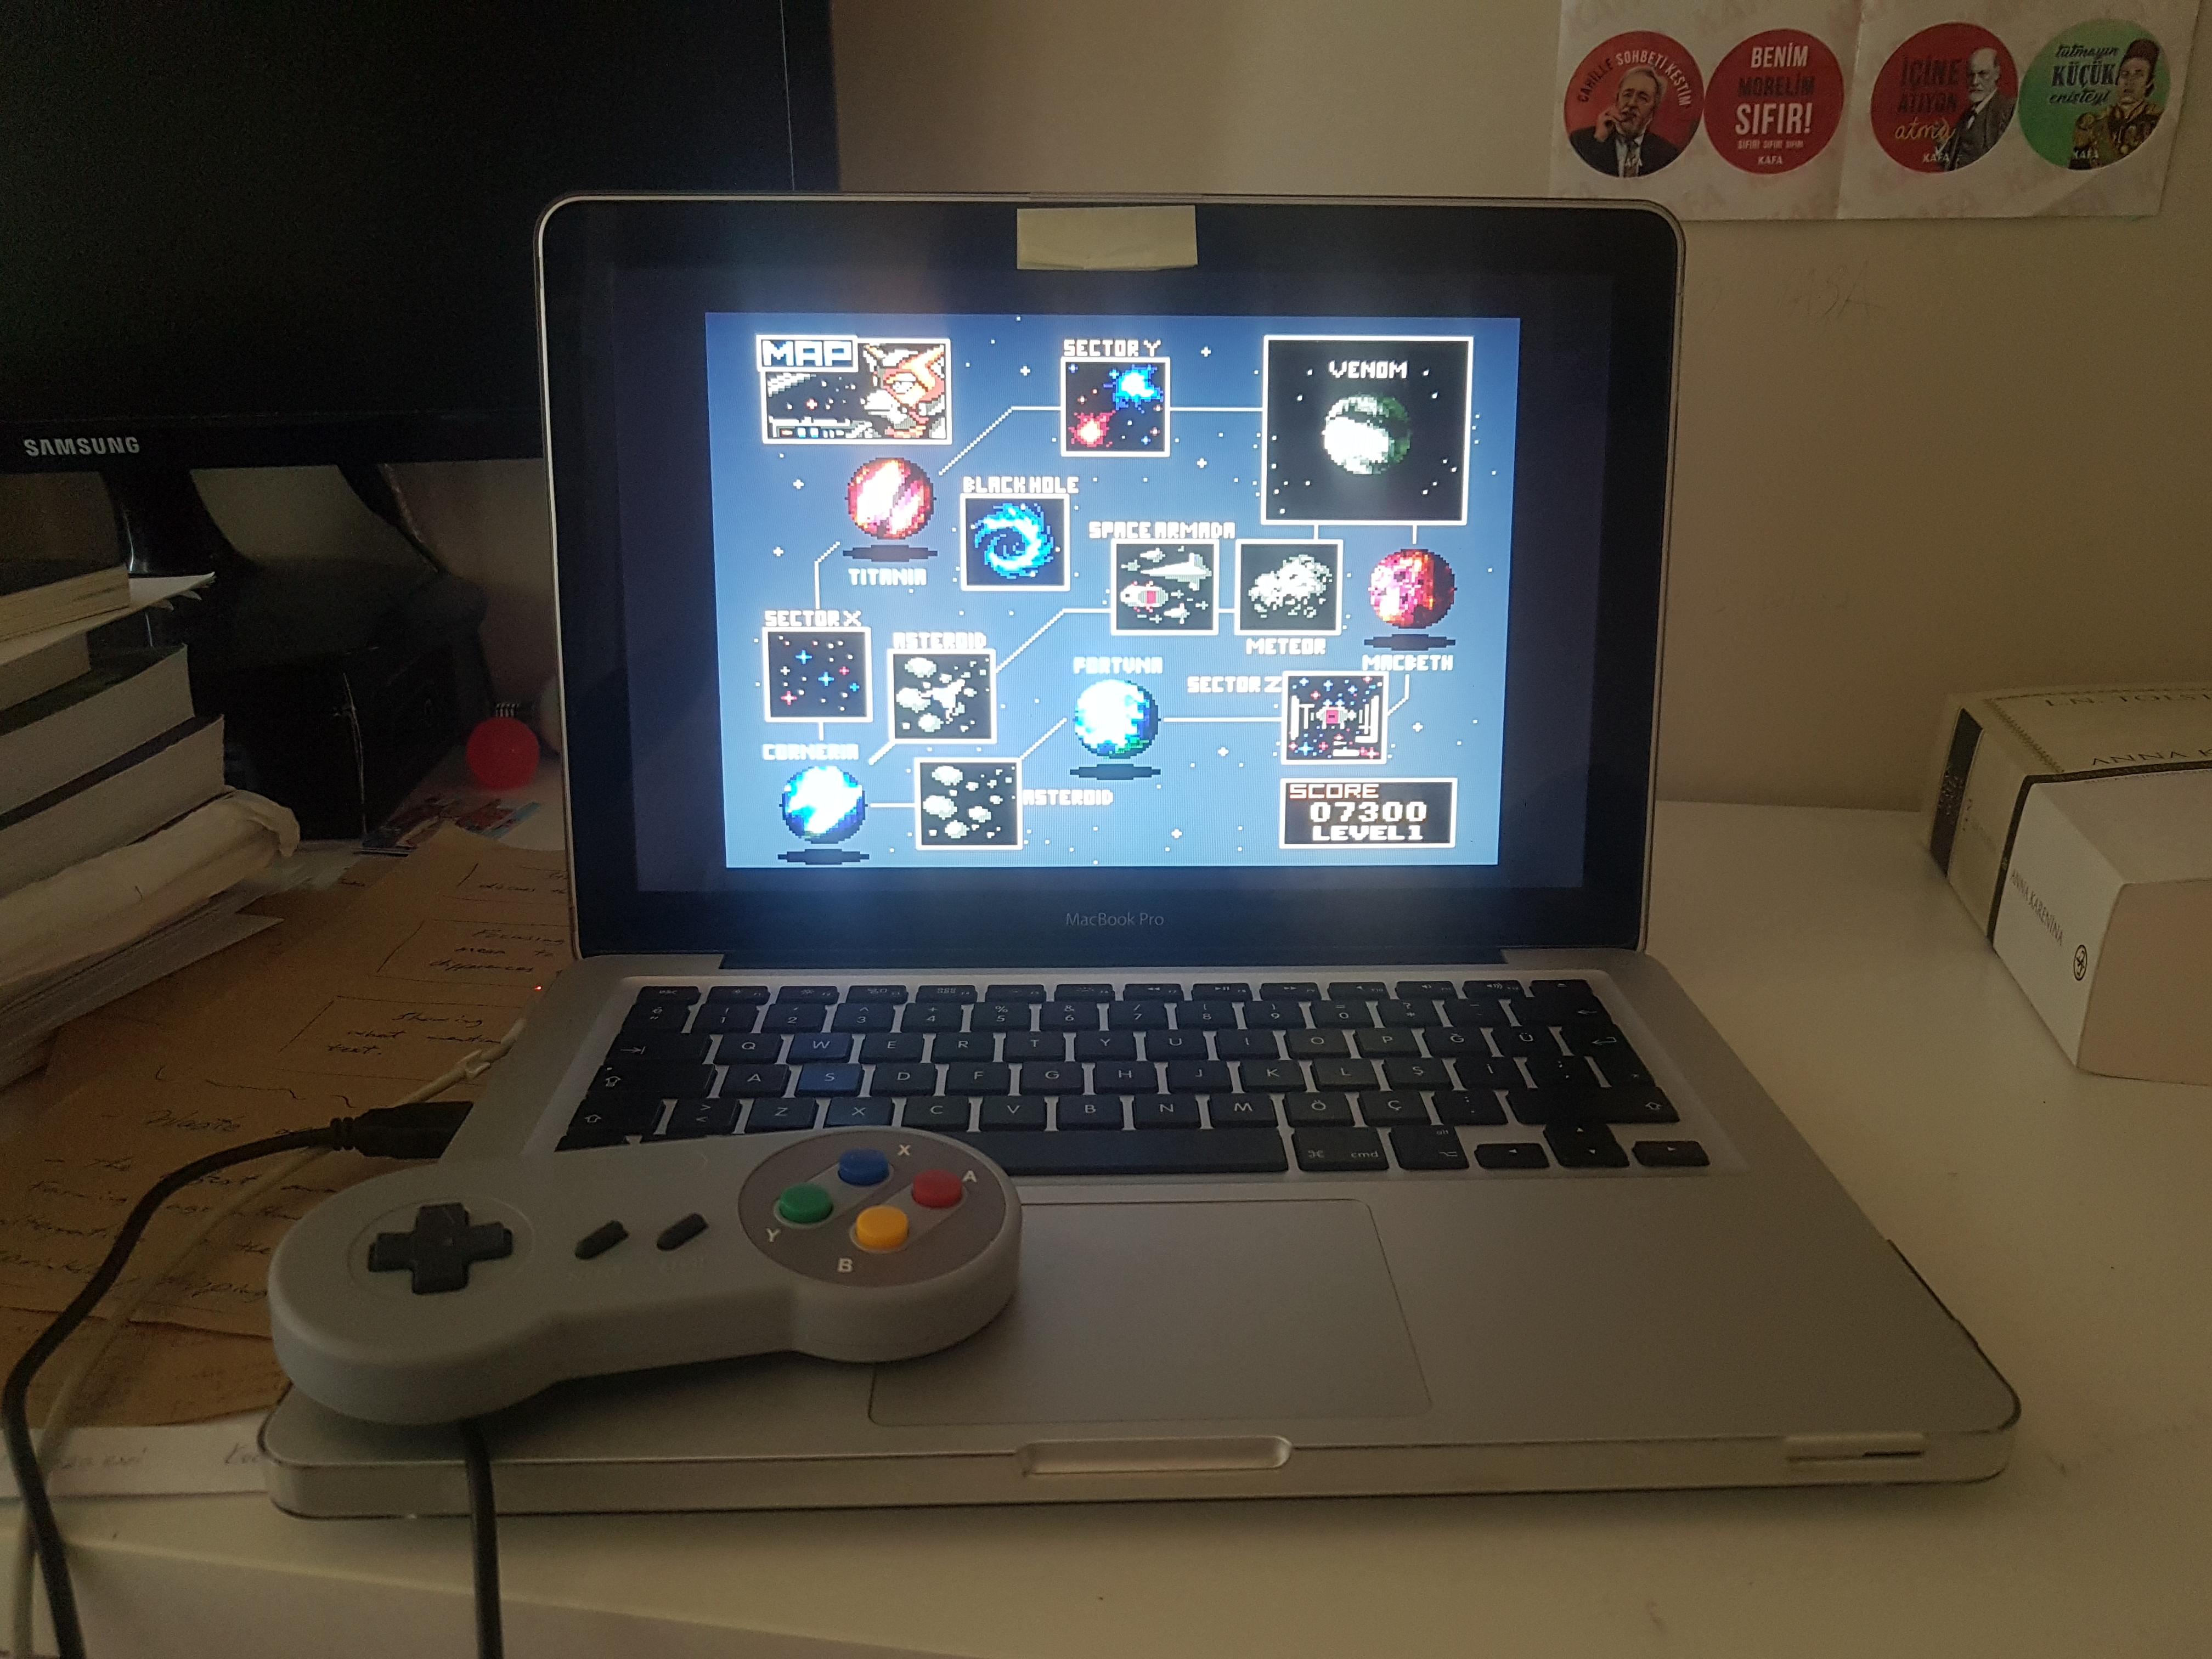 how to play emulator on mac pro